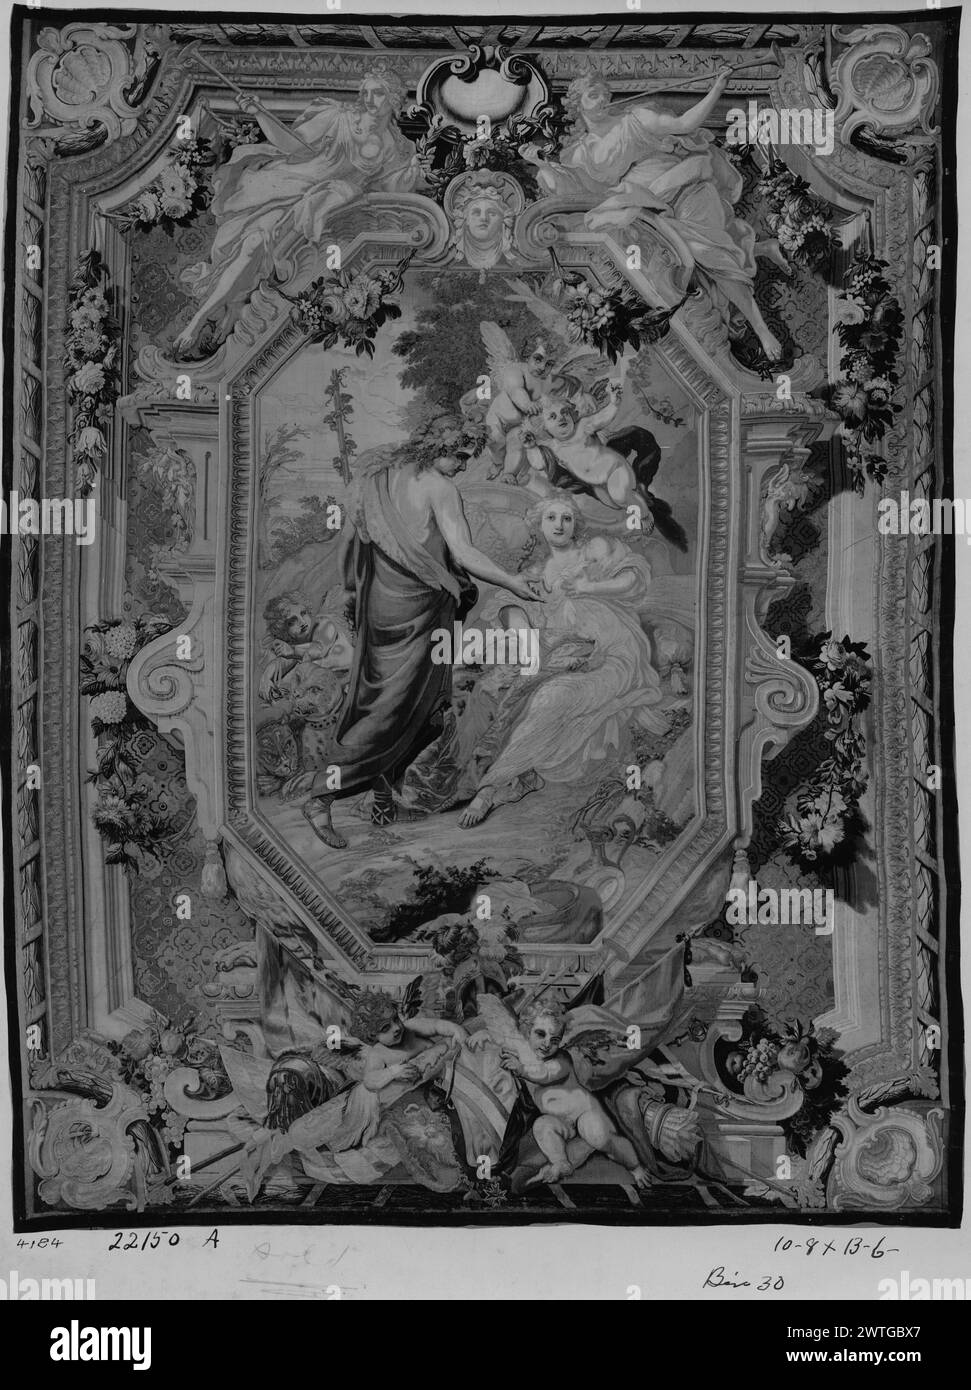 Bacchus (Dionysus) and Ariadne. unknown c. 1800-1850 ? Tapestry Dimensions: H 13'6' x W 10'8' Tapestry Materials/Techniques: unknown Culture: French Weaving Center: Aubusson Ownership History: French & Co. purchased from Mrs. George Blumenthal [first item on list of 6 tapestries, all in the present set], received 11/28/1919; transferred to stock no. 22150 [SS 10676]. In garden landscape, Bacchus & Ariadne, amongst cherubim, one alongside 2 leopards (L) (BRD) field within architectural, octagonal & godrooned central cartouche with (UPR BRD) 2 reclining figures of Fame (?), each holding a laurel Stock Photo